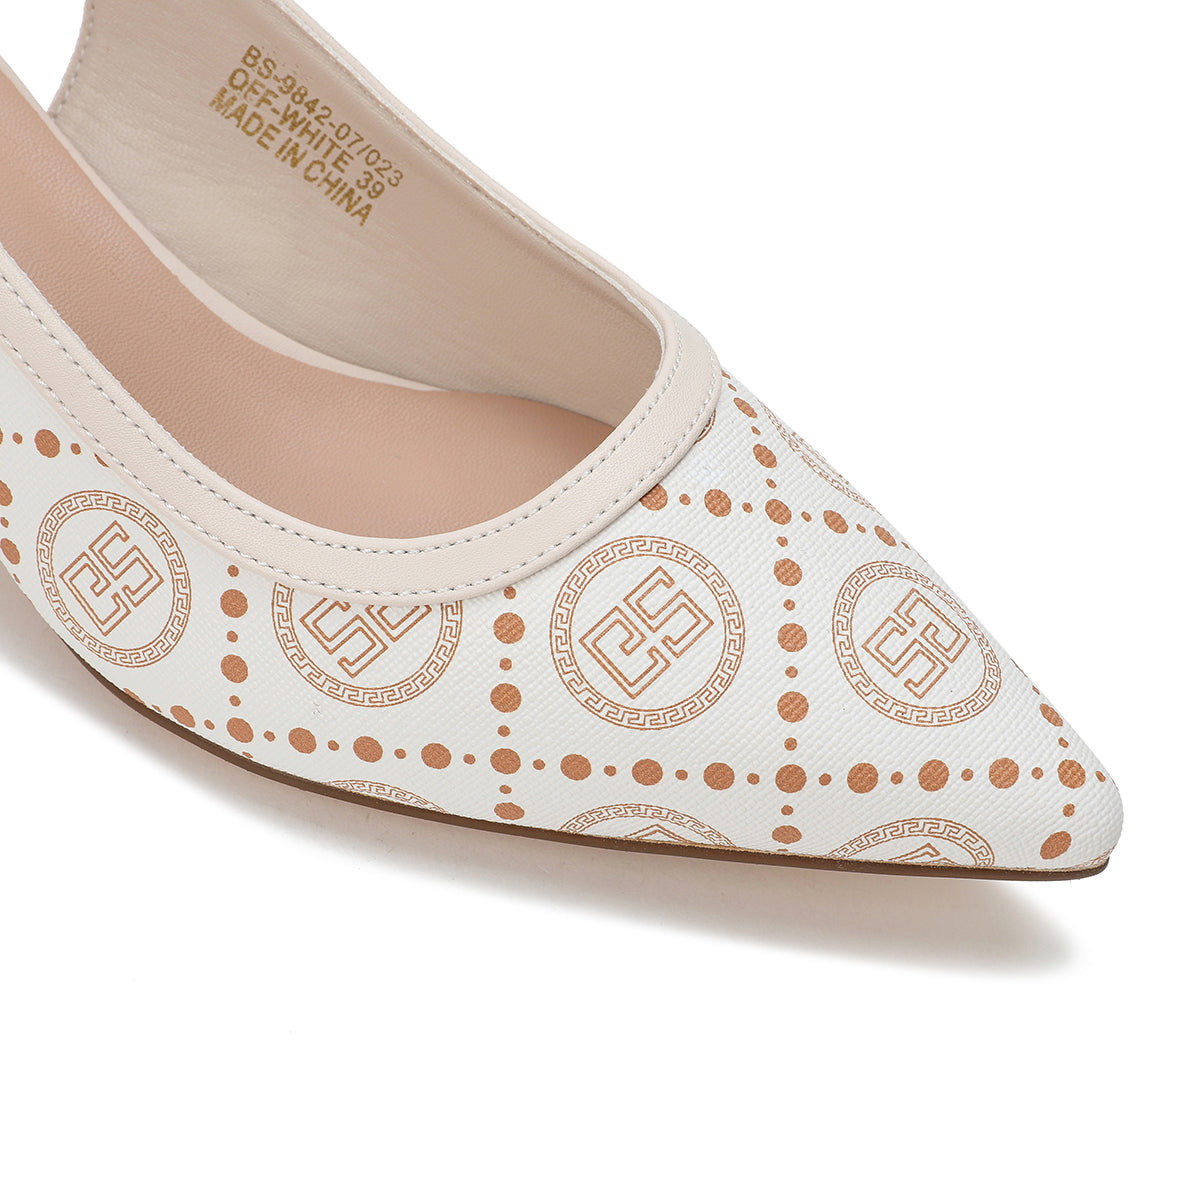 Luxurious leather shoes in beige color with a brown pattern